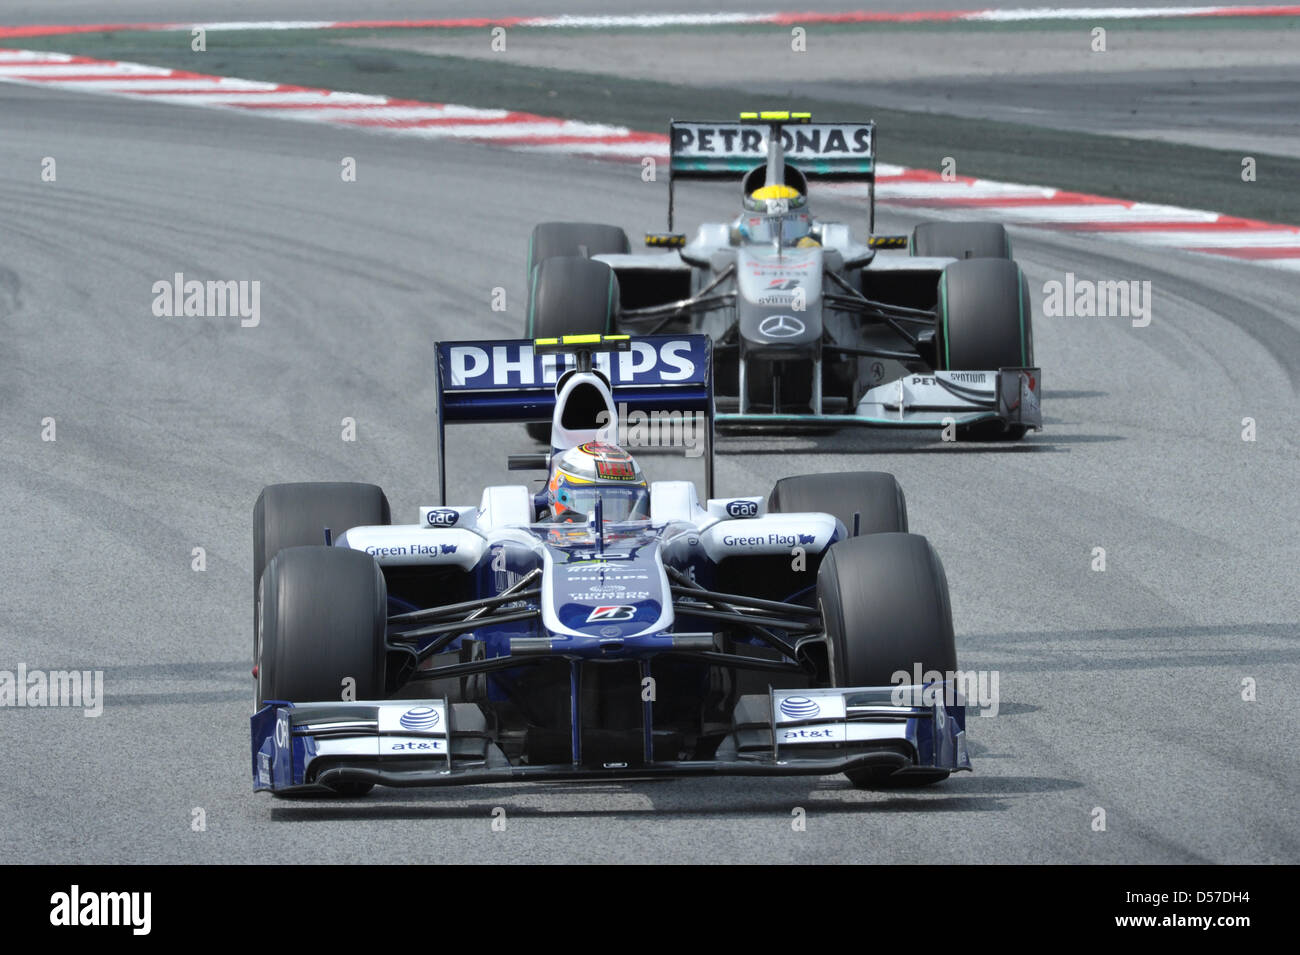 German driver Nico Huelkenberg of Williams F1 (front) defends his position against compatriot driver Nico Rosberg of Mercedes GP in the 2010 Formula 1 Grand Prix of Spain held at Circuit de Catalunya race track in Montmelo near Barcelona, Spain, 09 May 2010. Australia's Webber of Red Bull Racing won ahead of Spain's Alonso of Scuderia Ferrari and Germany's Vettel of Red Bull Racing Stock Photo